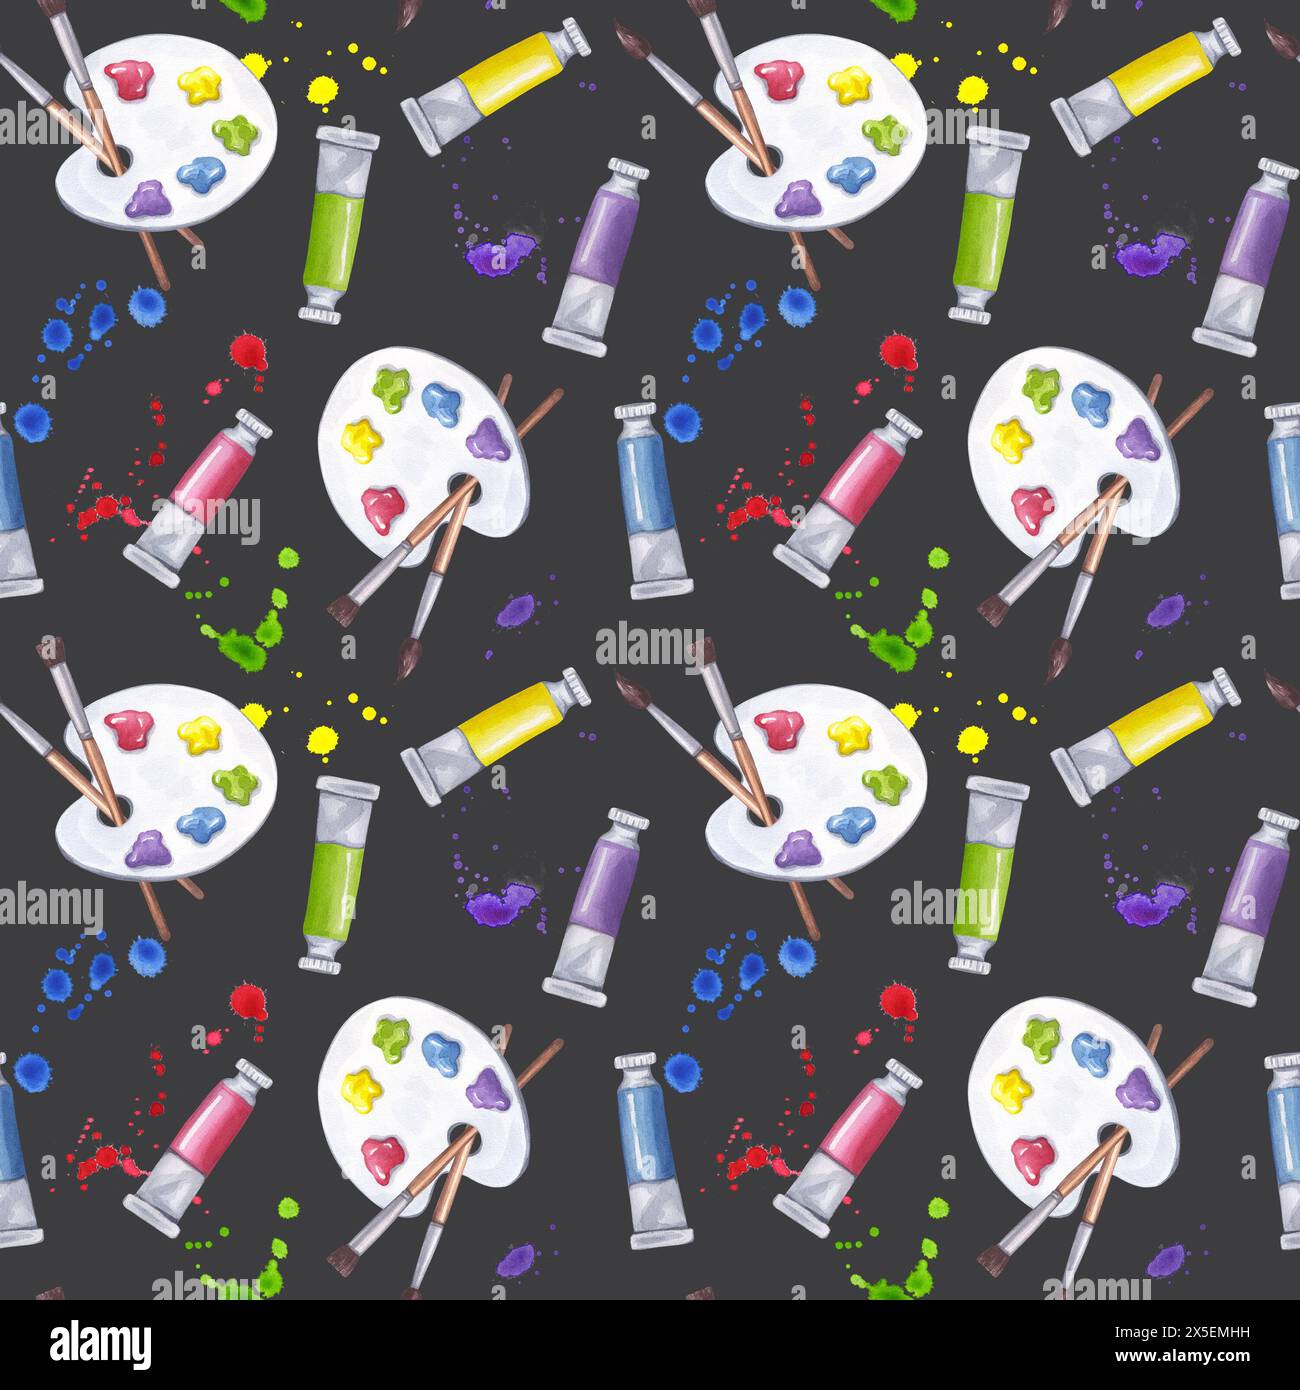 Seamless pattern art supplies colored paint palette paintbrushes tubes cuvettes tempera, gouache. Ink splatters drop spots. Hand drawn watercolor Stock Photo